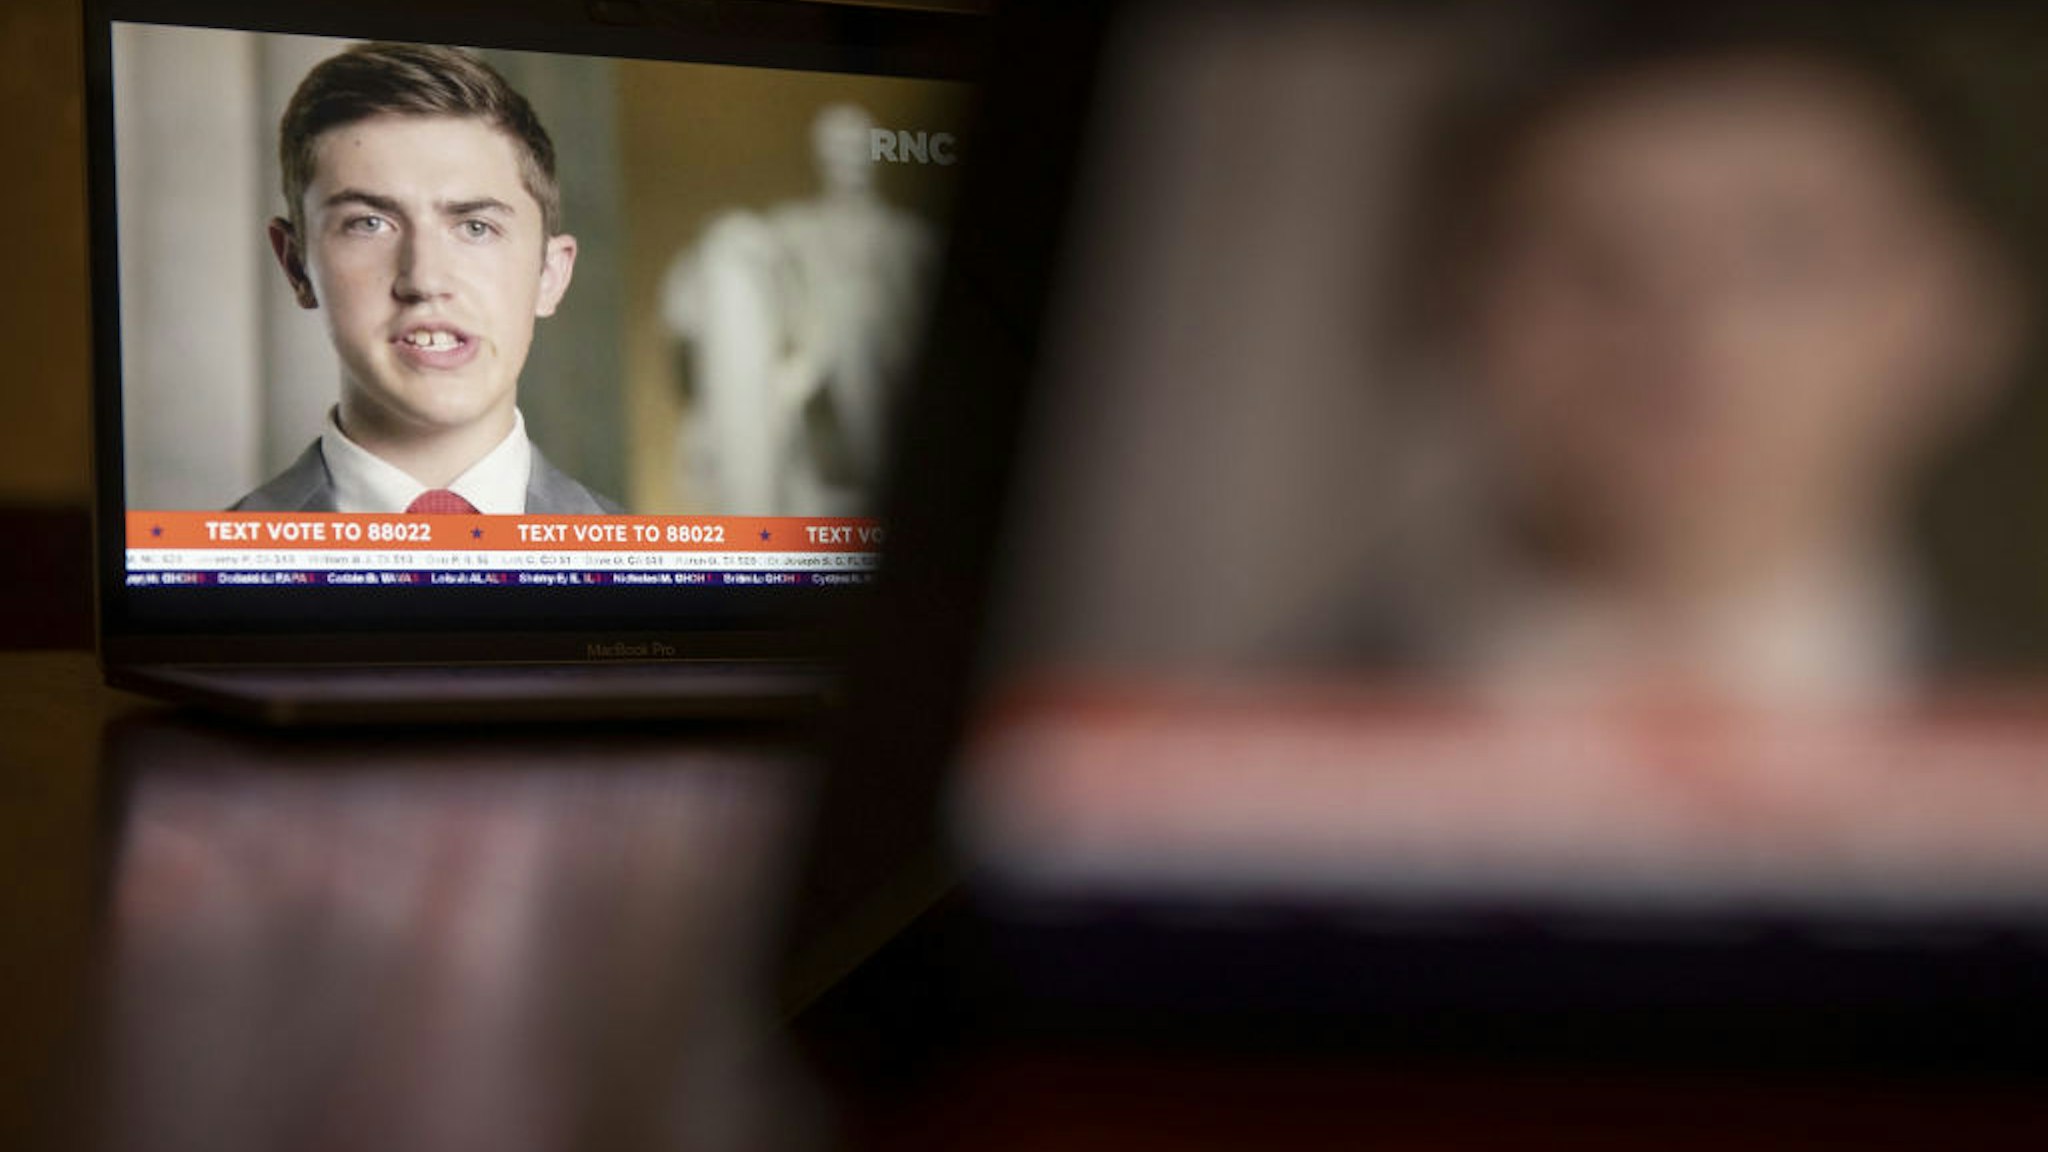 Nicholas Sandmann speaks during the Republican National Convention seen on a laptop computer in Tiskilwa, Illinois, U.S., on Tuesday, Aug. 25, 2020.